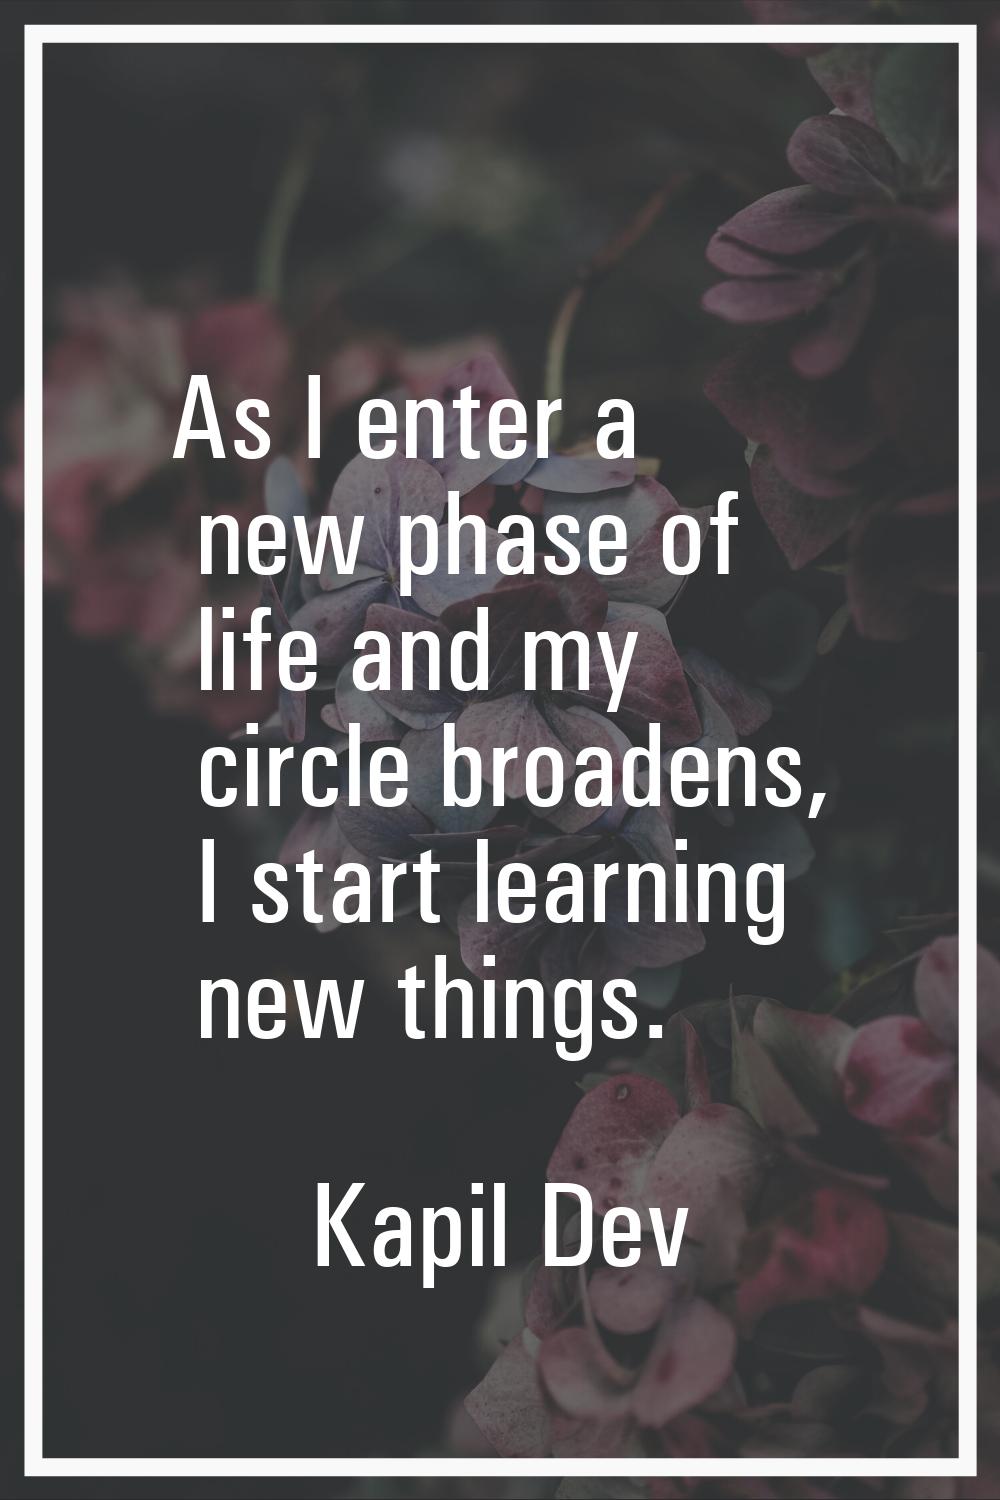 As I enter a new phase of life and my circle broadens, I start learning new things.